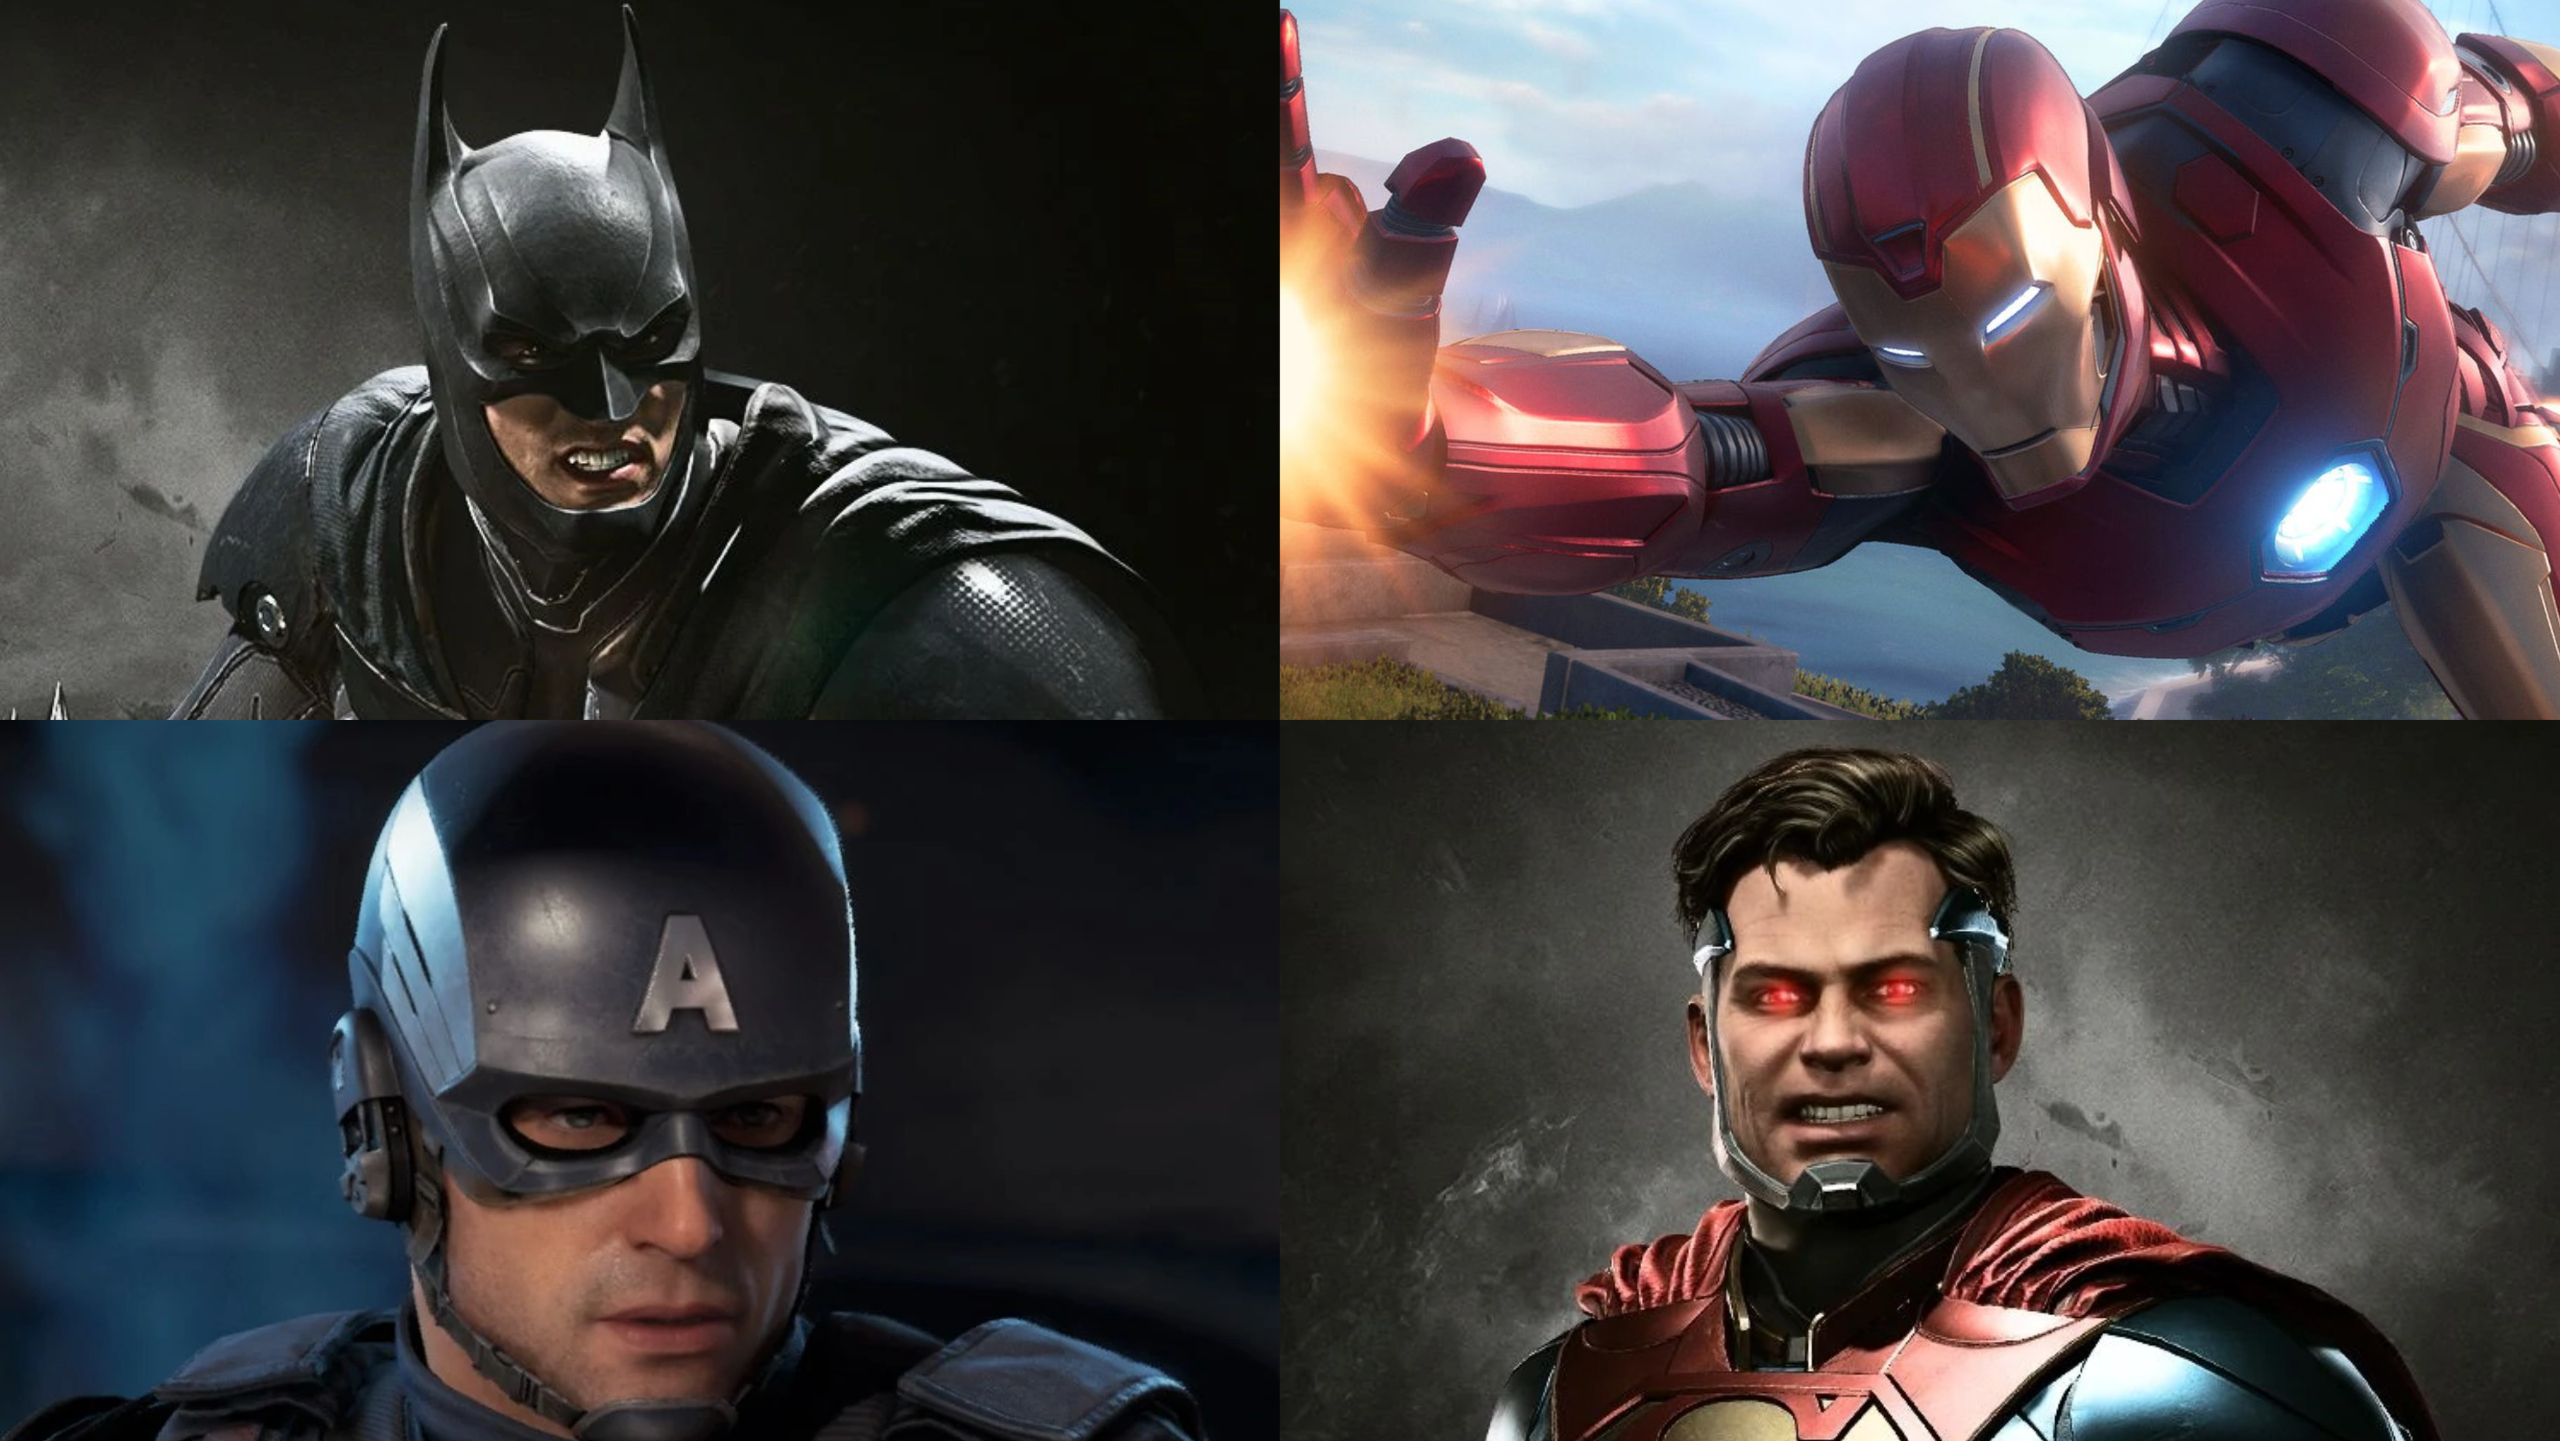 Marvel vs DC Game Mortal Kombat Dev asks fans if they want this to happen - Injustice Marvel's Avengers